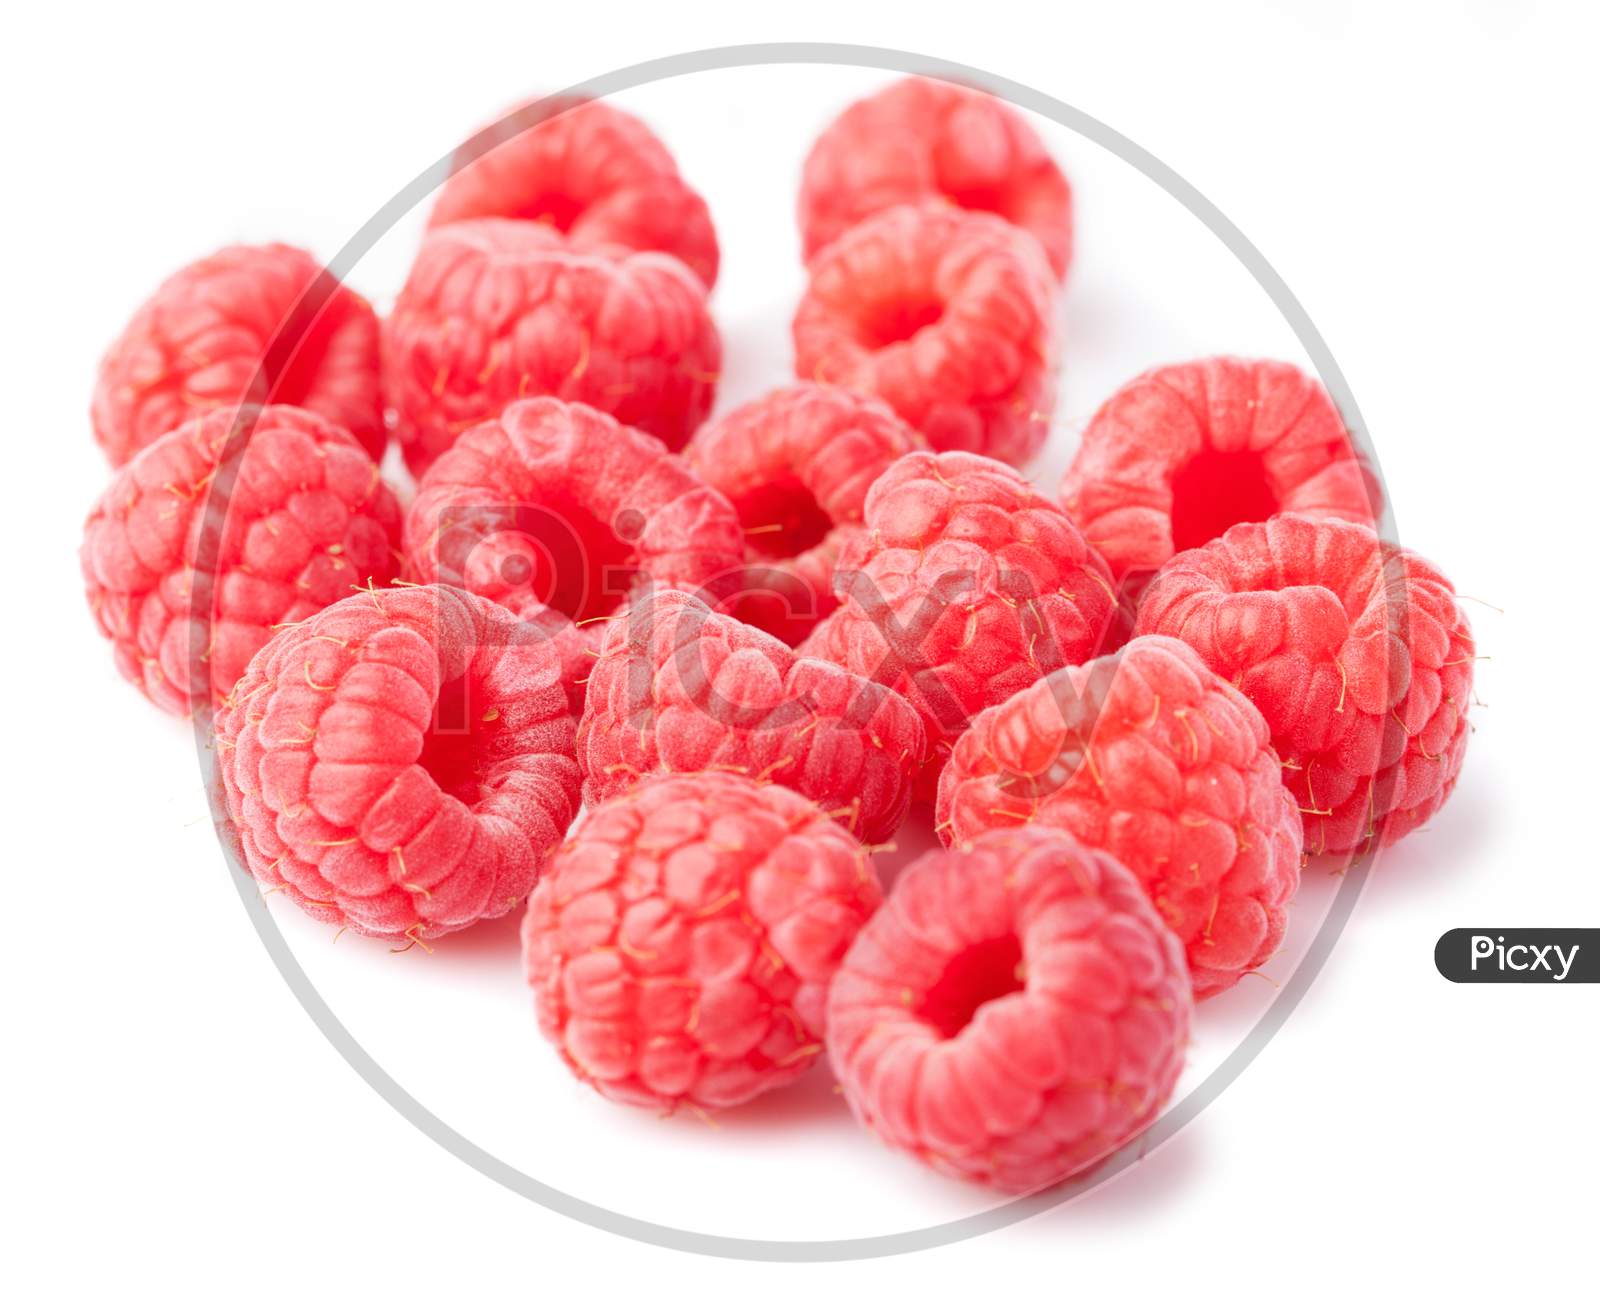 Group Of Raspberries Isolated On A White Background